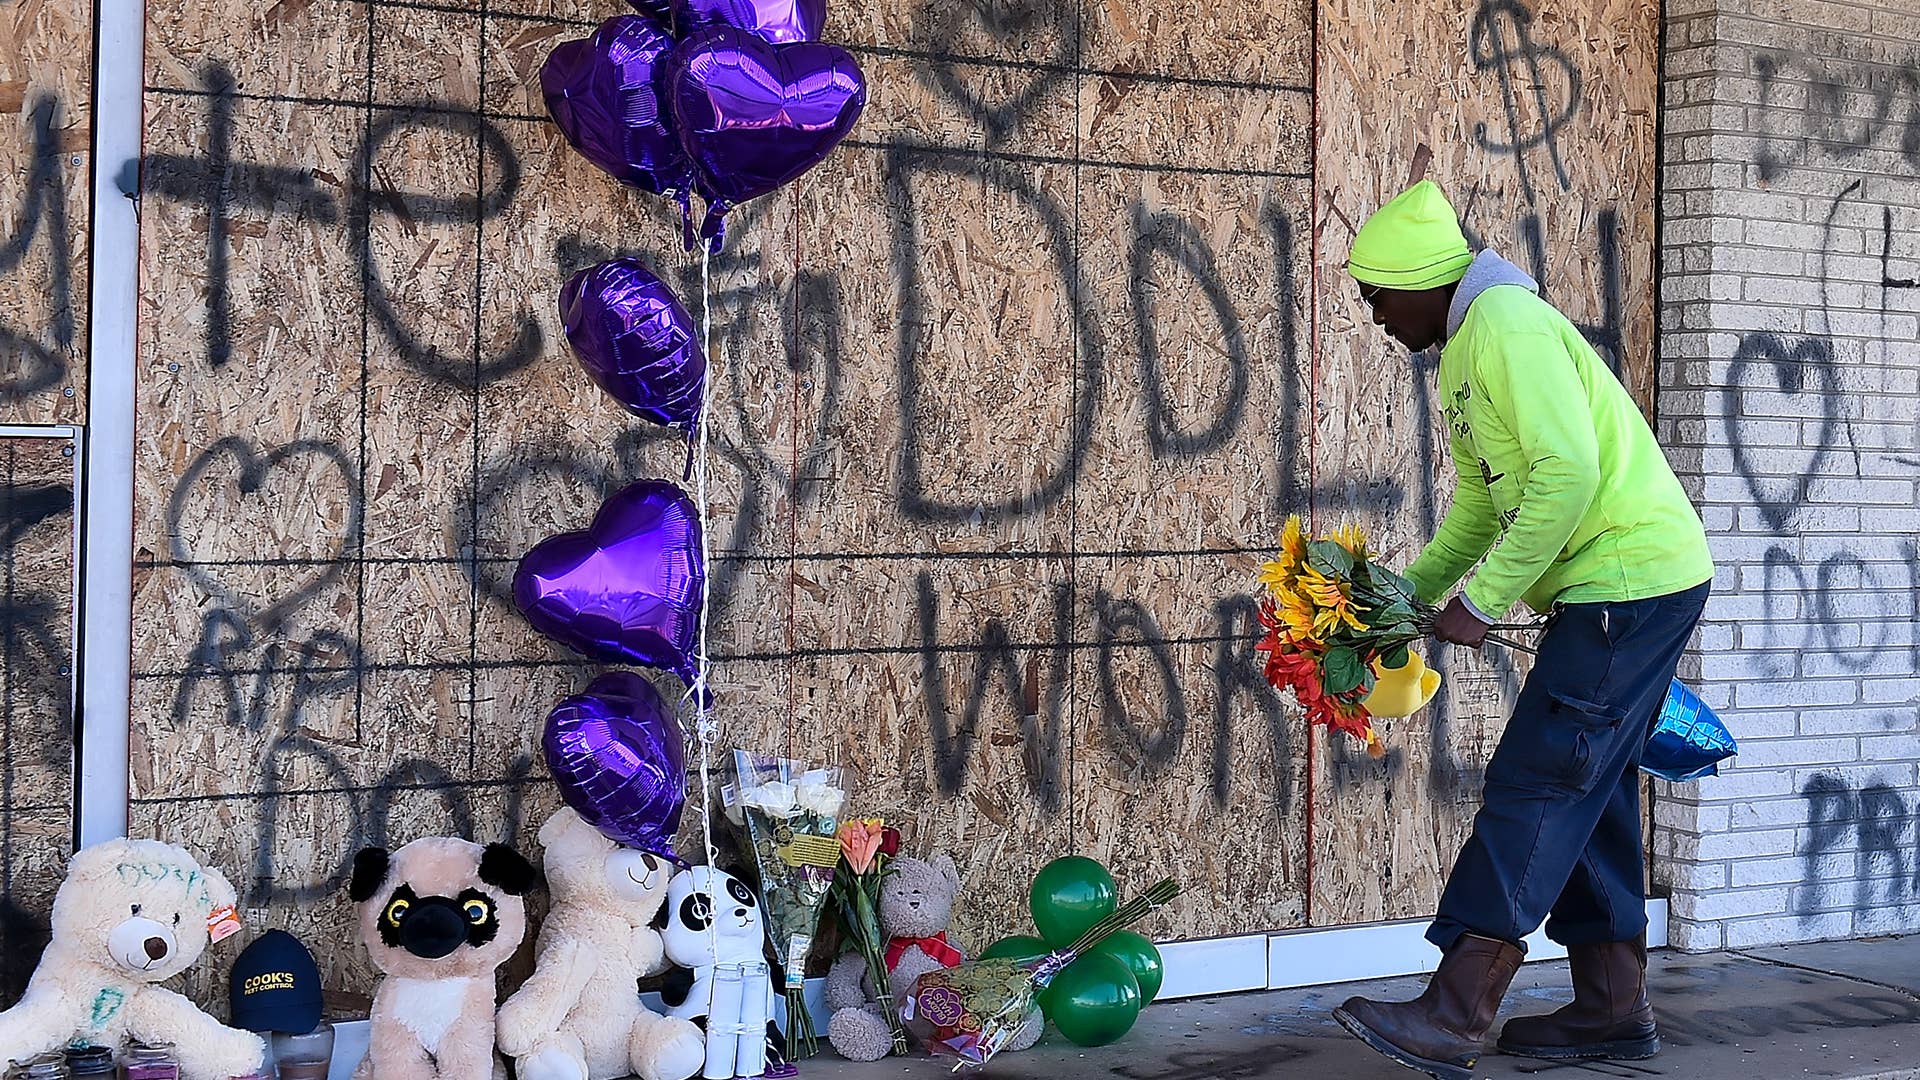 A man places flowers at the memorial for Young Dolph outside of Makeda's Cookies bakery